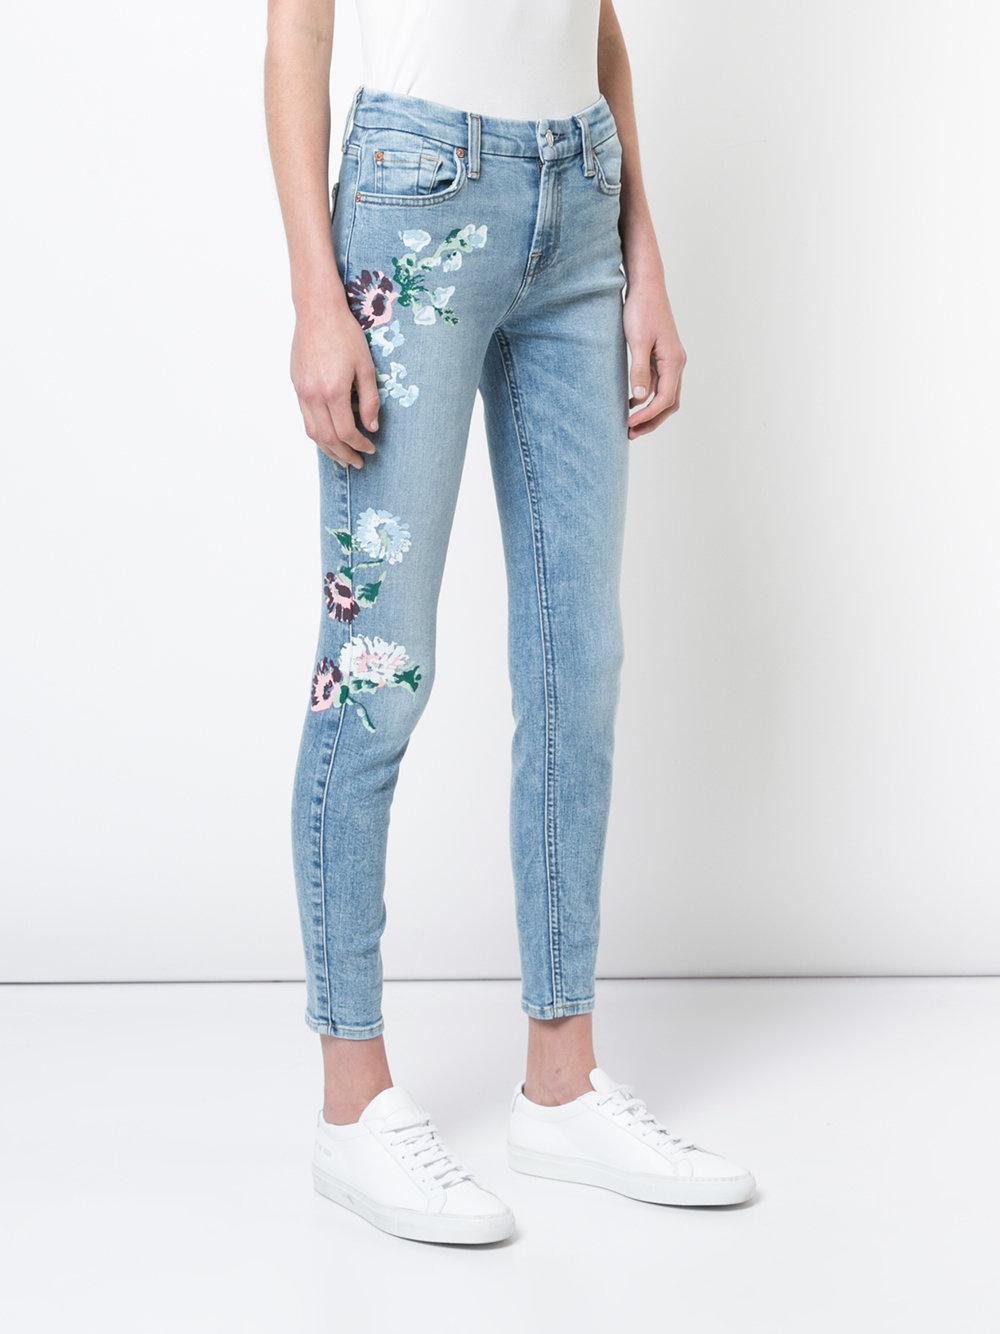 7 For All Mankind Denim Hand-painted Floral Print Skinny Jeans in Blue ...